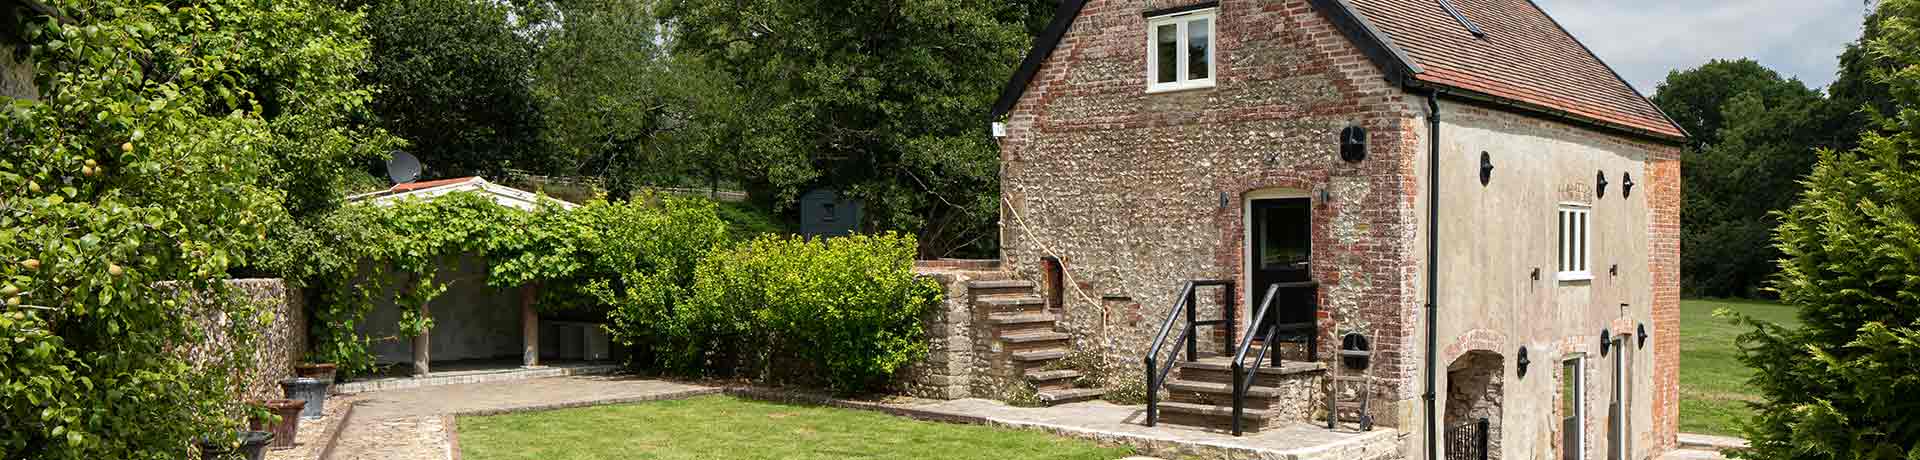 Cottages for 4 people in Sussex